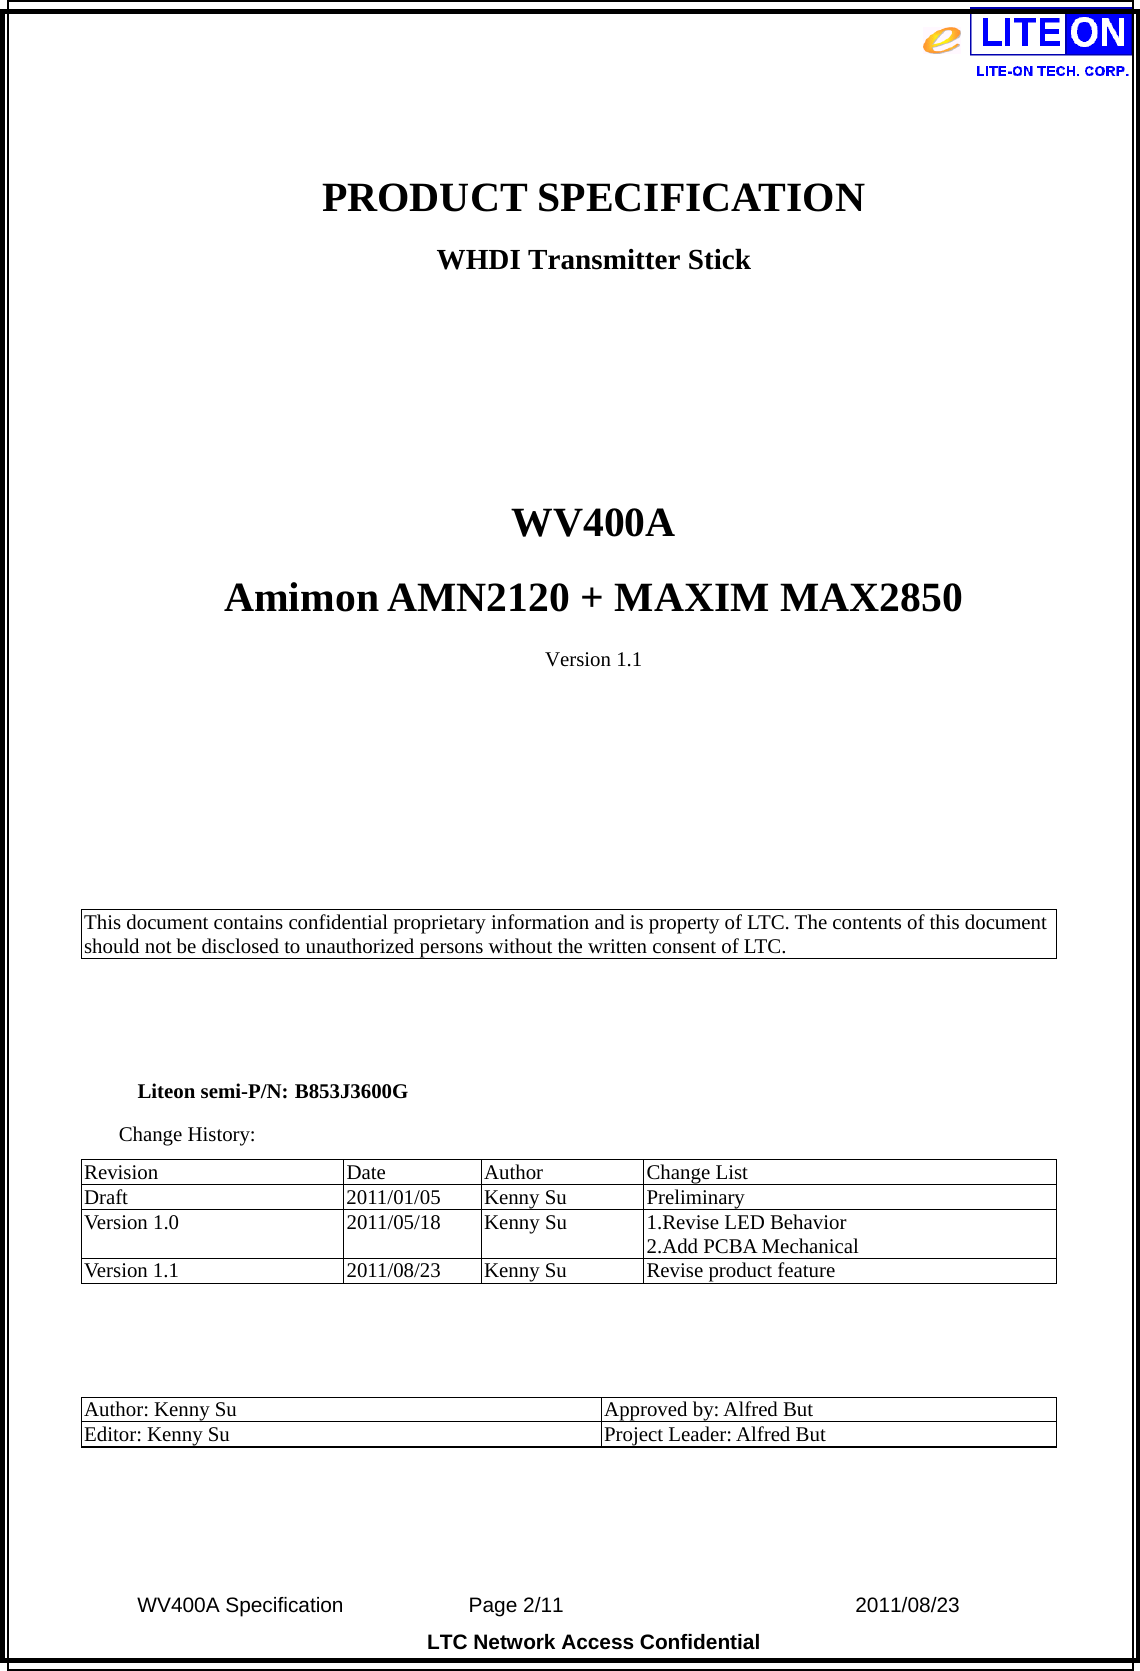  WV400A Specification             Page 2/11                            2011/08/23 LTC Network Access Confidential  PRODUCT SPECIFICATION WHDI Transmitter Stick    WV400A Amimon AMN2120 + MAXIM MAX2850 Version 1.1       This document contains confidential proprietary information and is property of LTC. The contents of this document should not be disclosed to unauthorized persons without the written consent of LTC.    Liteon semi-P/N: B853J3600G Change History: Revision Date Author Change List Draft 2011/01/05 Kenny Su Preliminary Version 1.0  2011/05/18  Kenny Su  1.Revise LED Behavior 2.Add PCBA Mechanical Version 1.1  2011/08/23  Kenny Su  Revise product feature    Author: Kenny Su  Approved by: Alfred But Editor: Kenny Su  Project Leader: Alfred But   